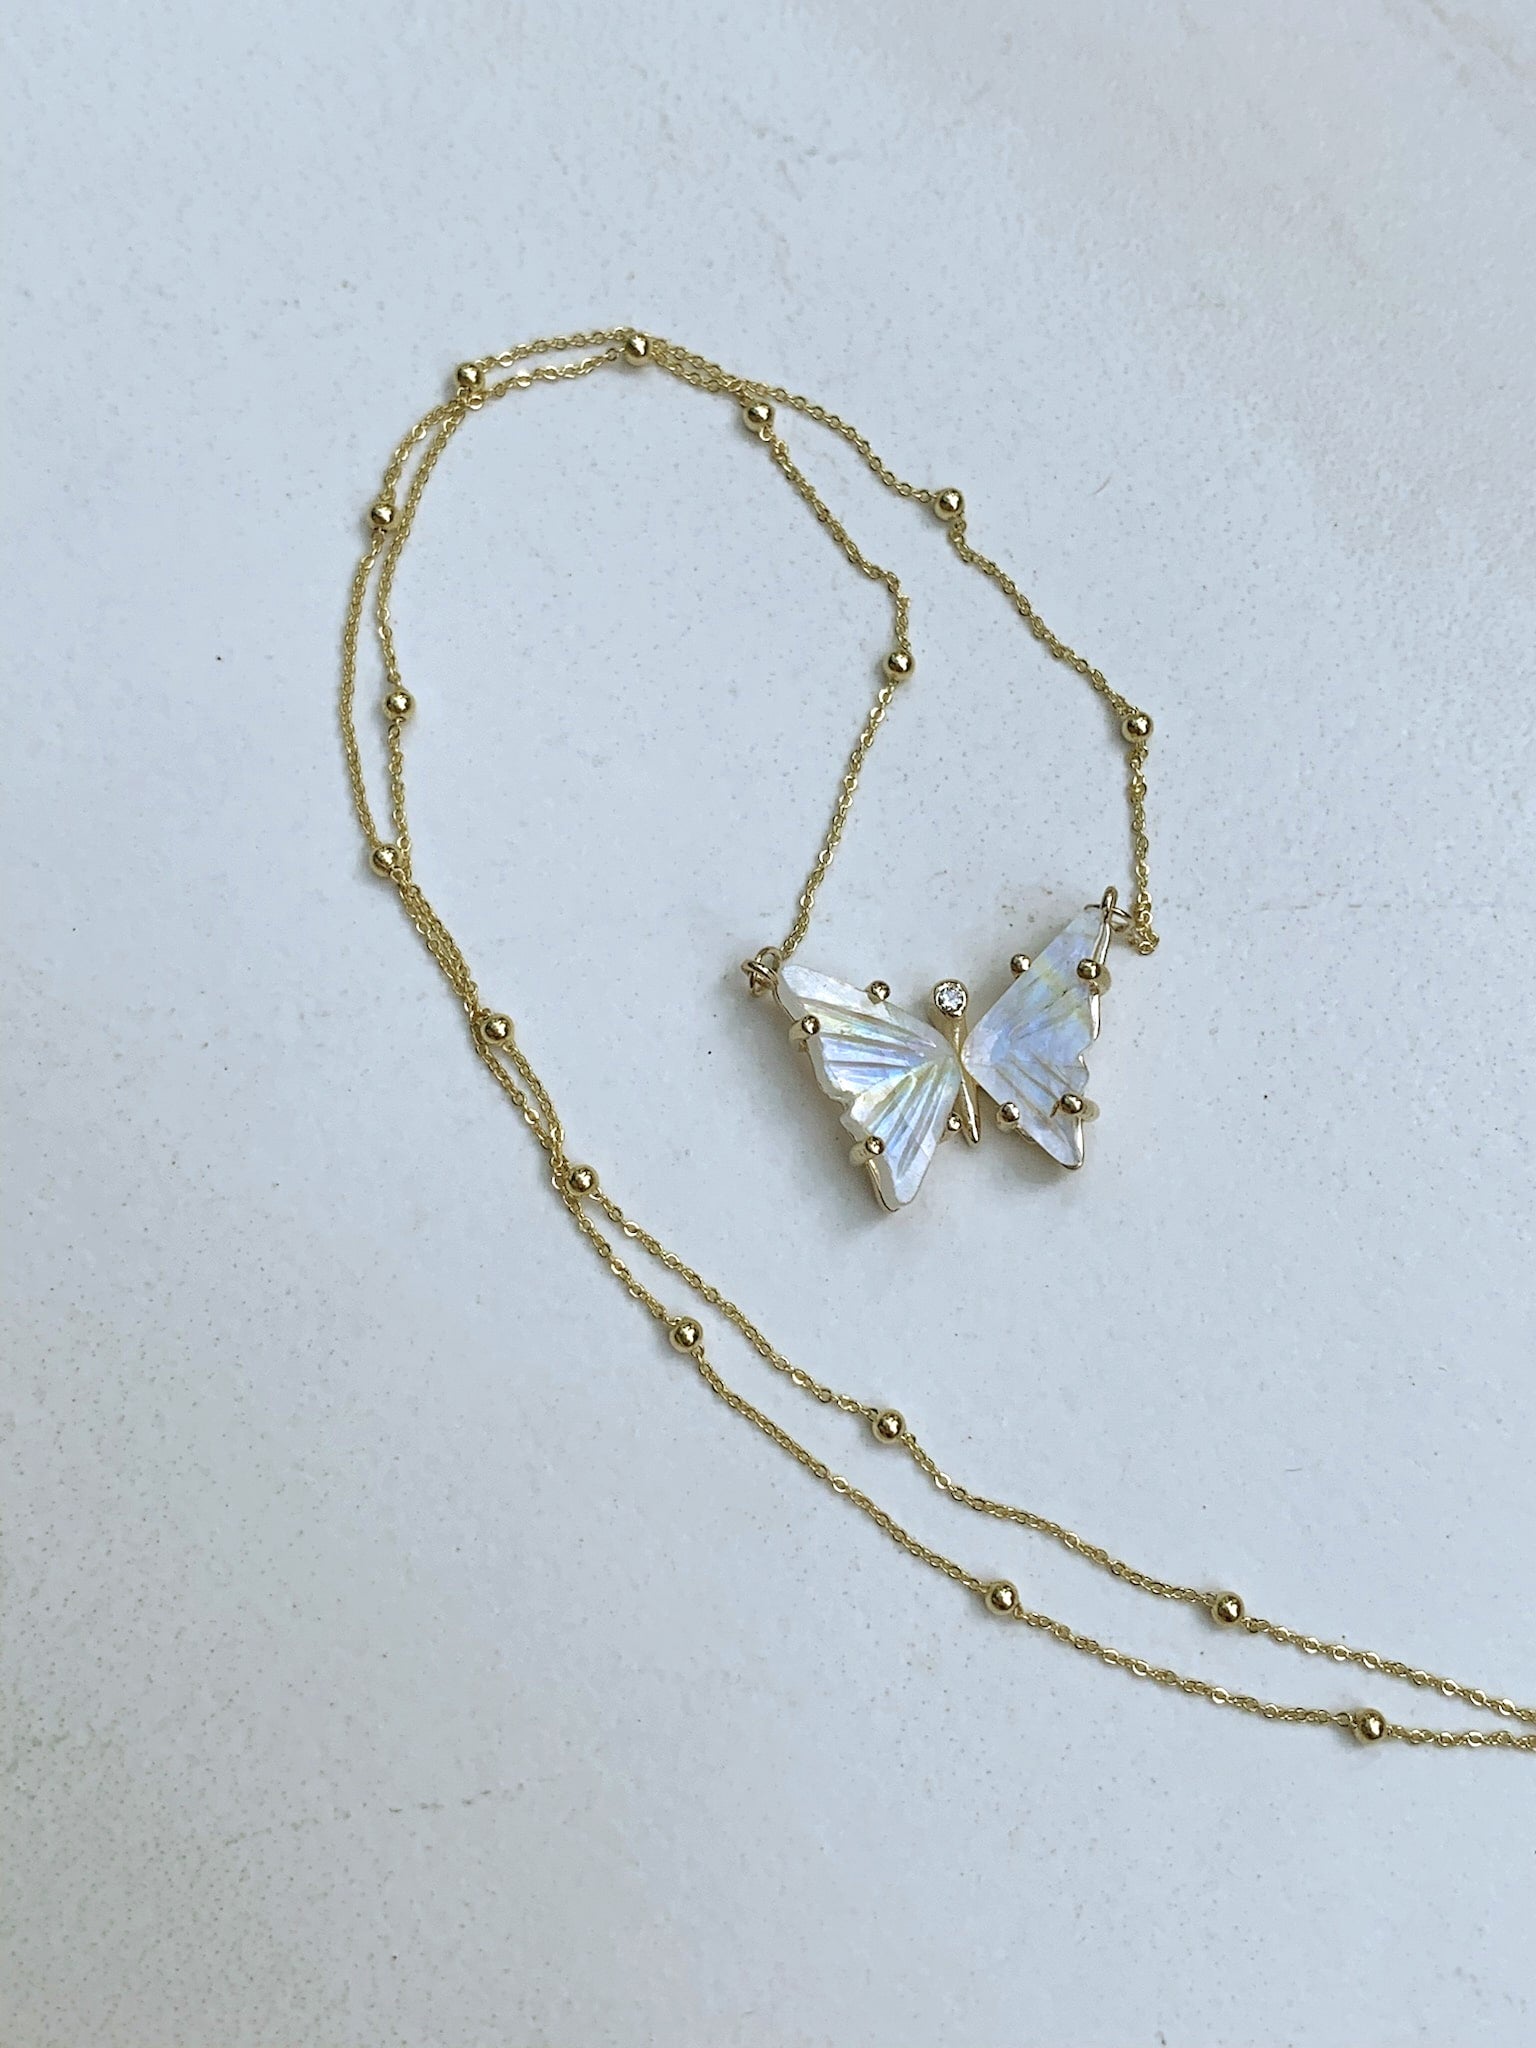 Moonstone Butterfly Satellite Necklace